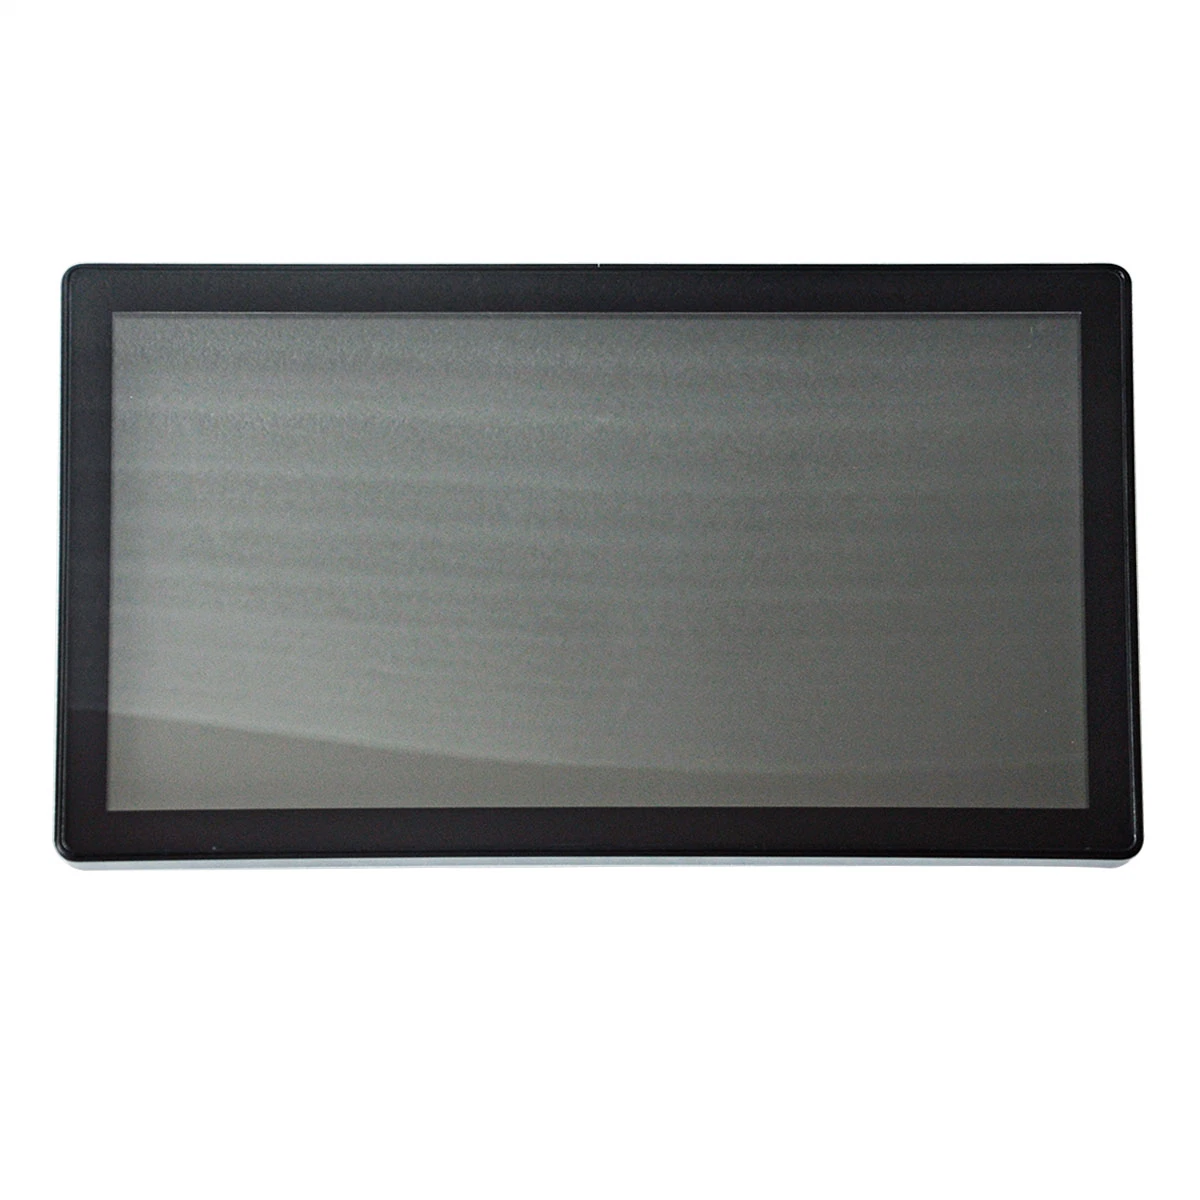 18.5 Inch Industrial LCD Touch Screen Monitor Display Touch Screen TV Monitor